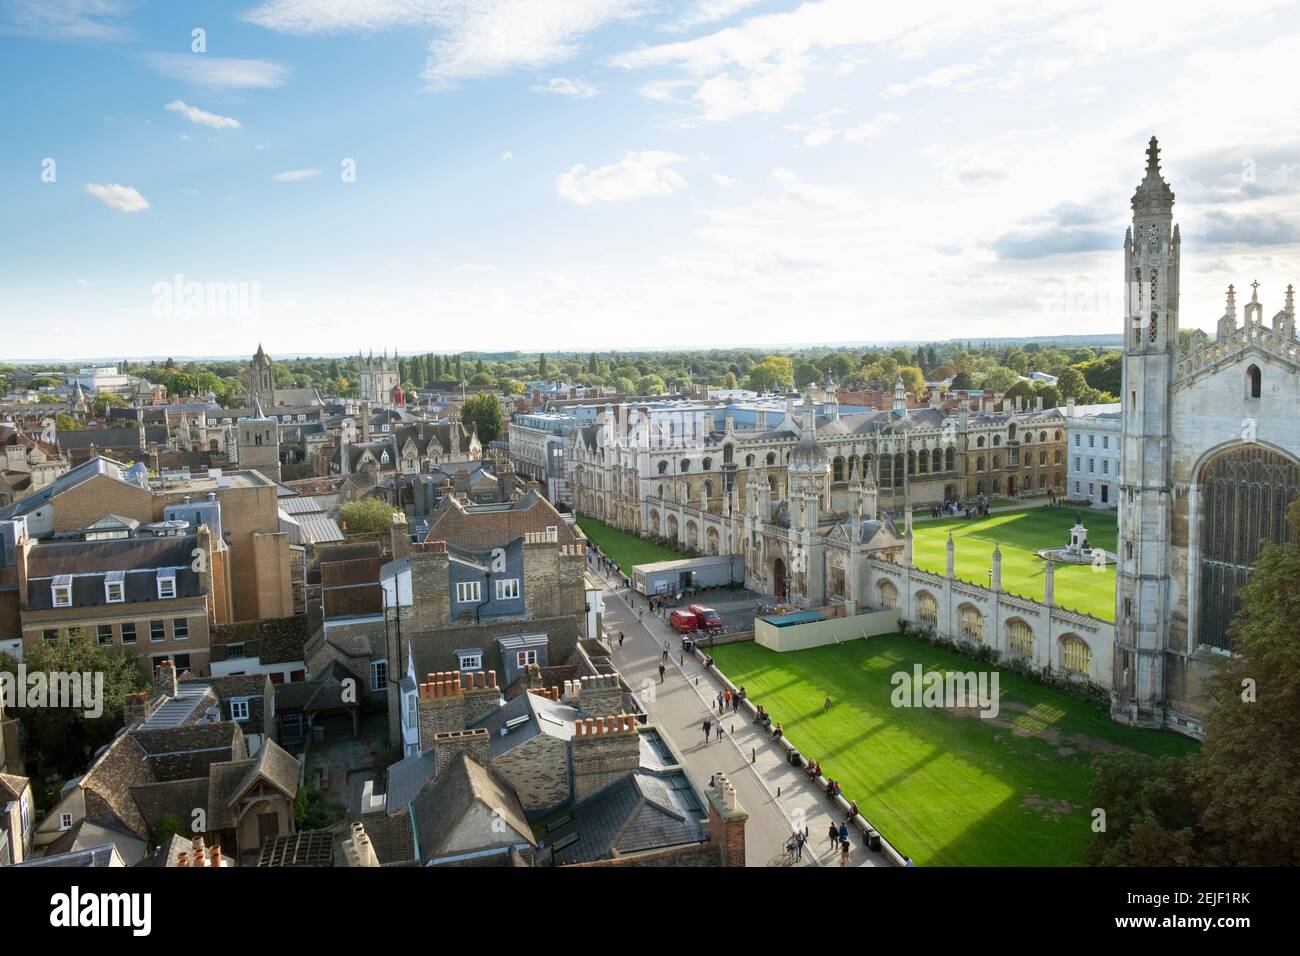 Cambridge, UK. September 21st 2017 - Kings College Cambridge is one of the world's top universities in the City of Cambridge which is also famous for Stock Photo